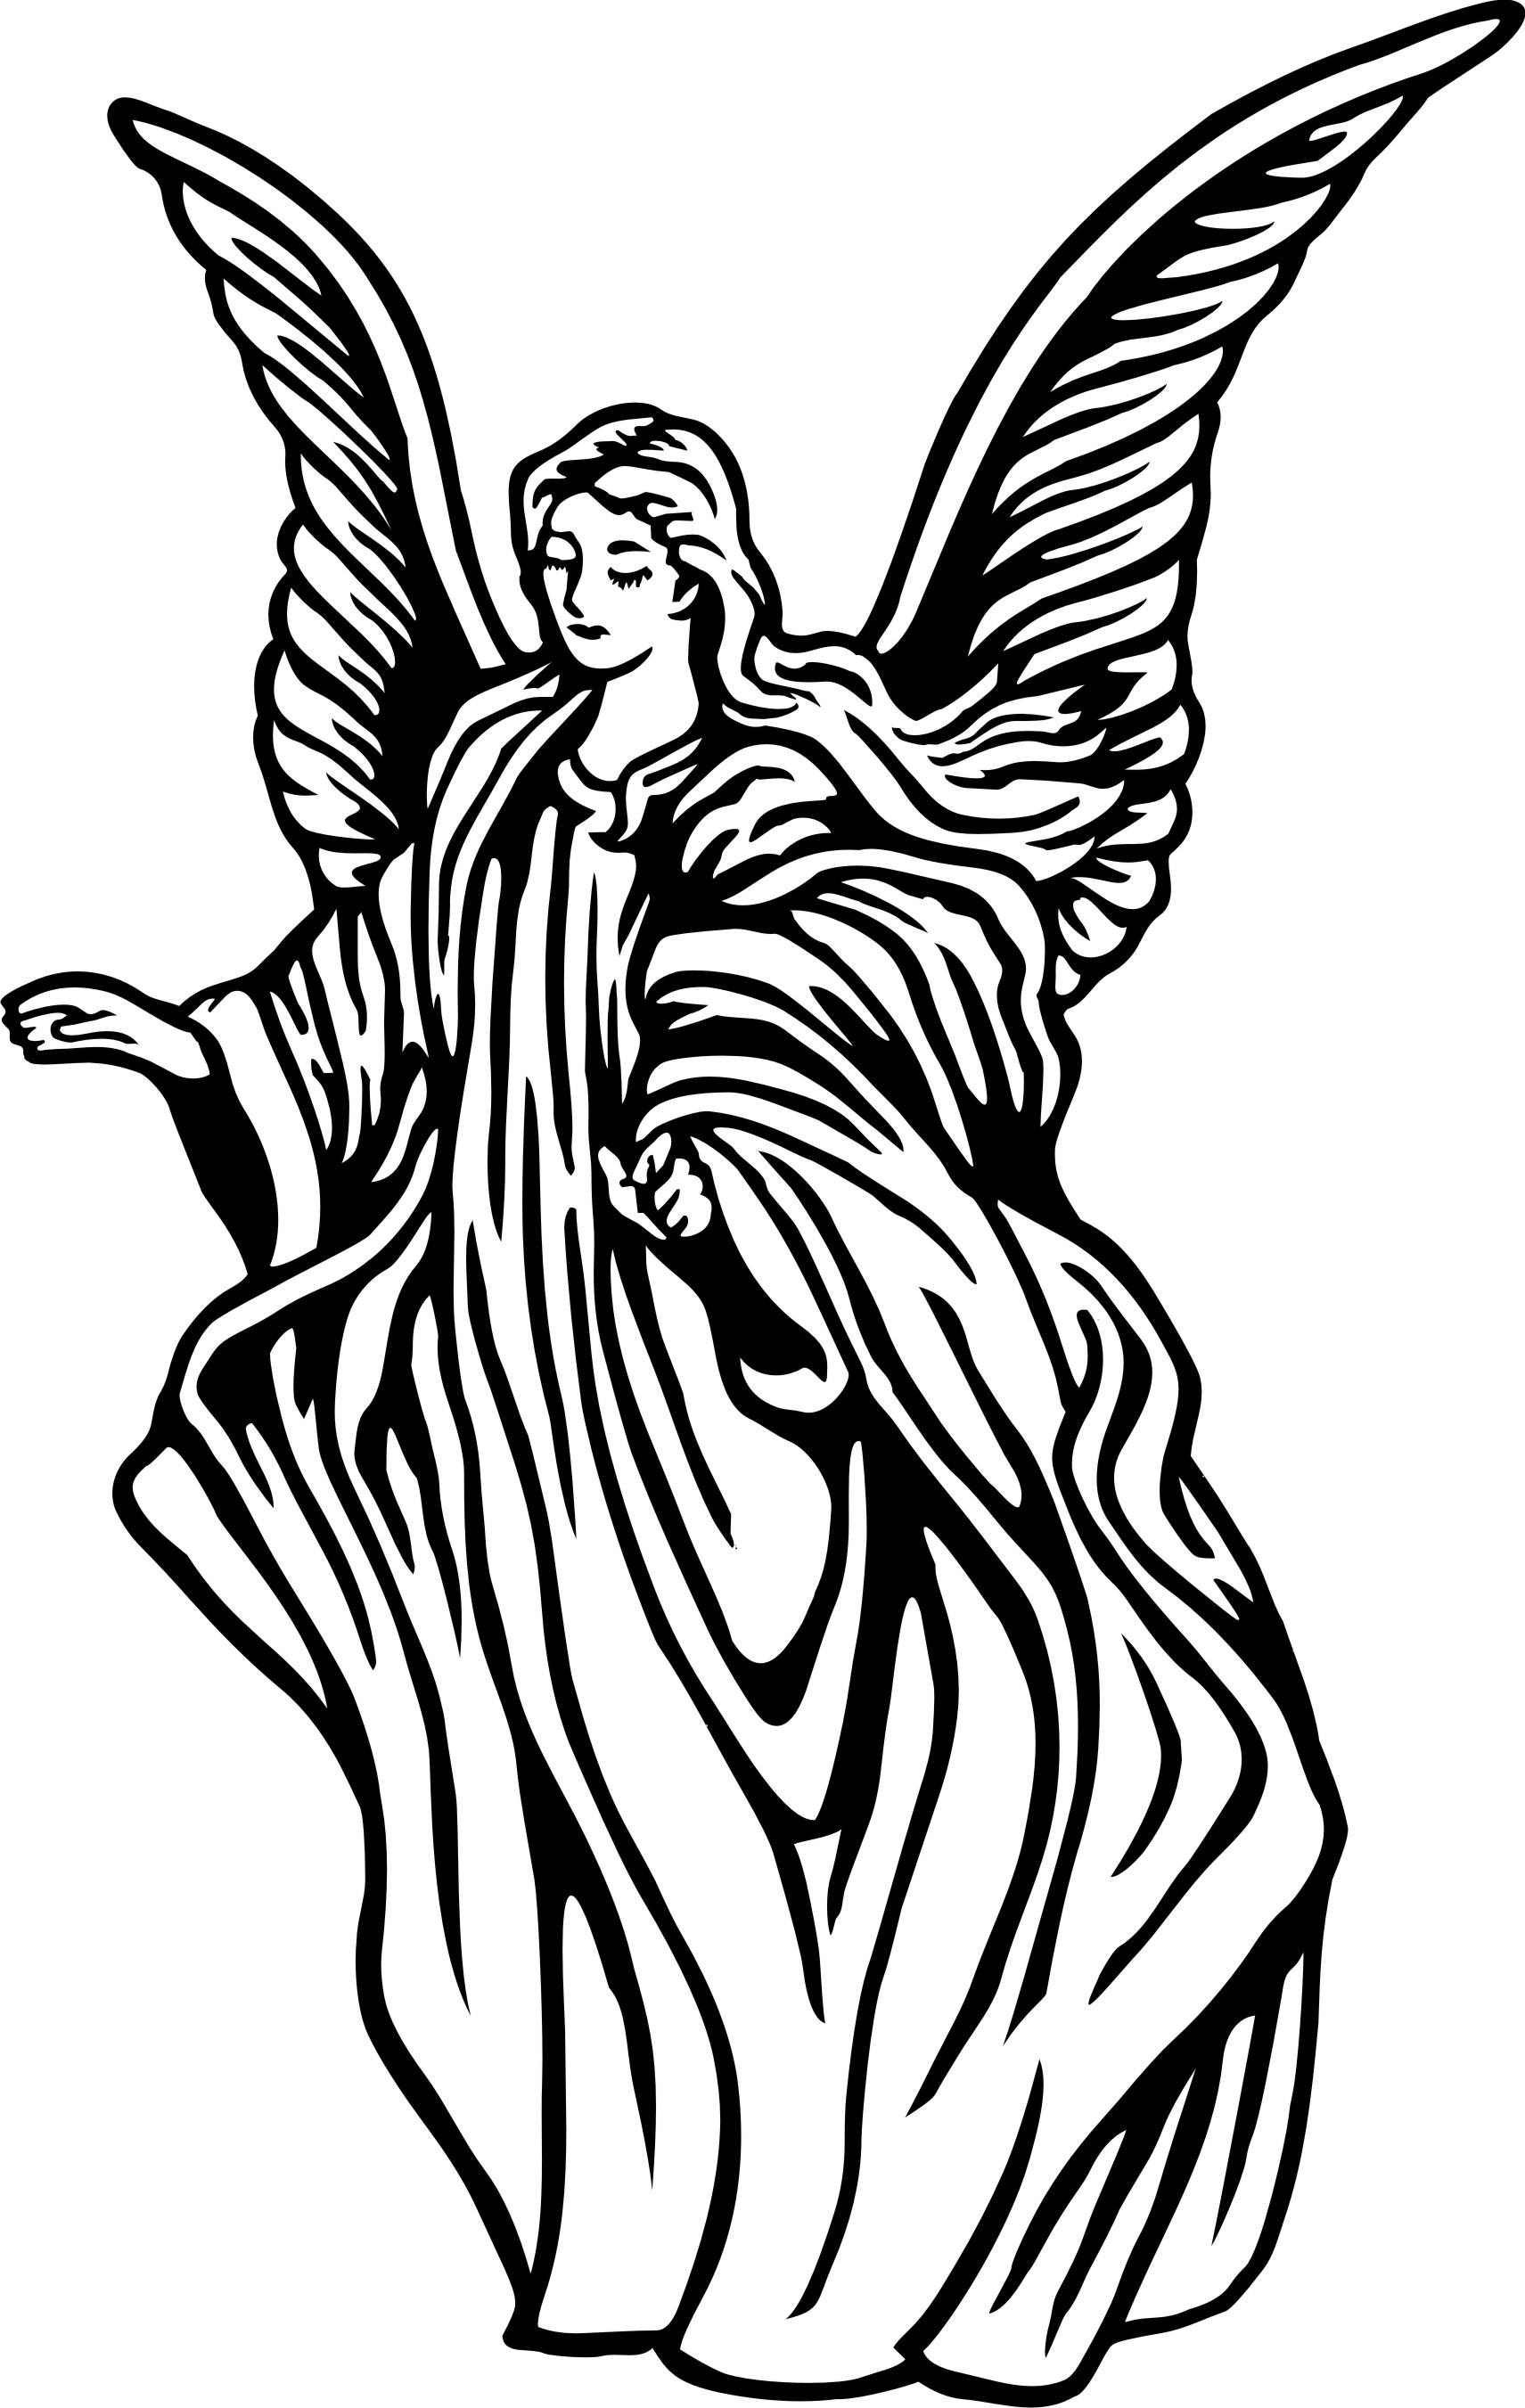 Guardian Angel Coloring Page - Free Printable Coloring Pages for Kids